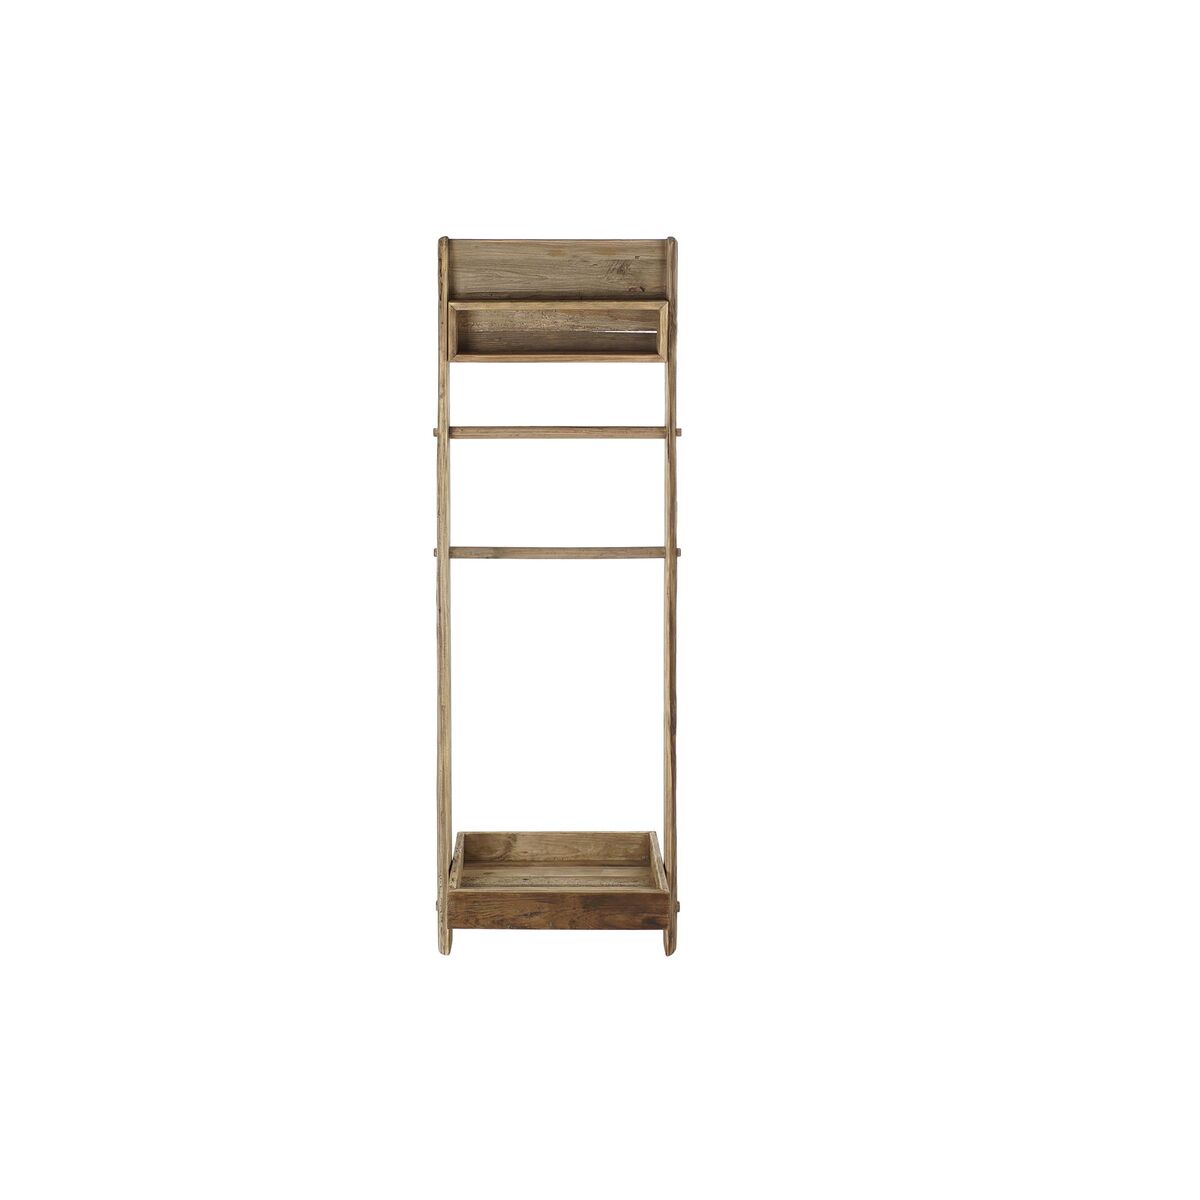 Shelves DKD Home Decor 62 x 45 x 178 cm Natural Recycled Wood